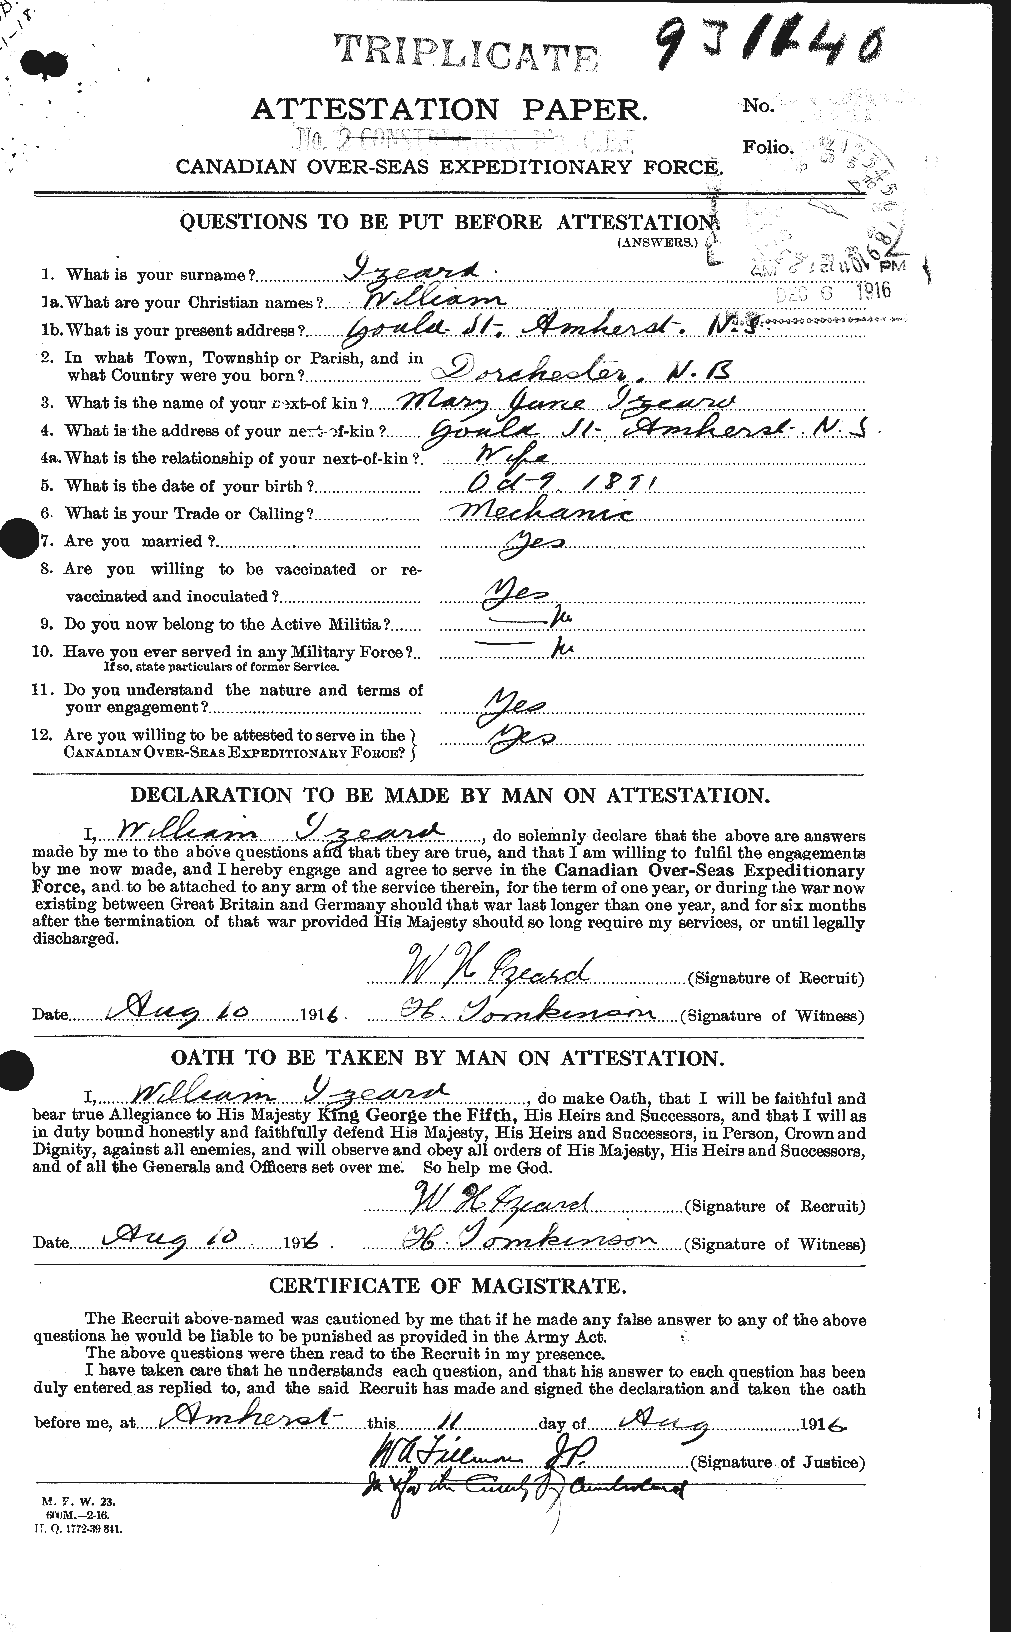 Personnel Records of the First World War - CEF 416441a